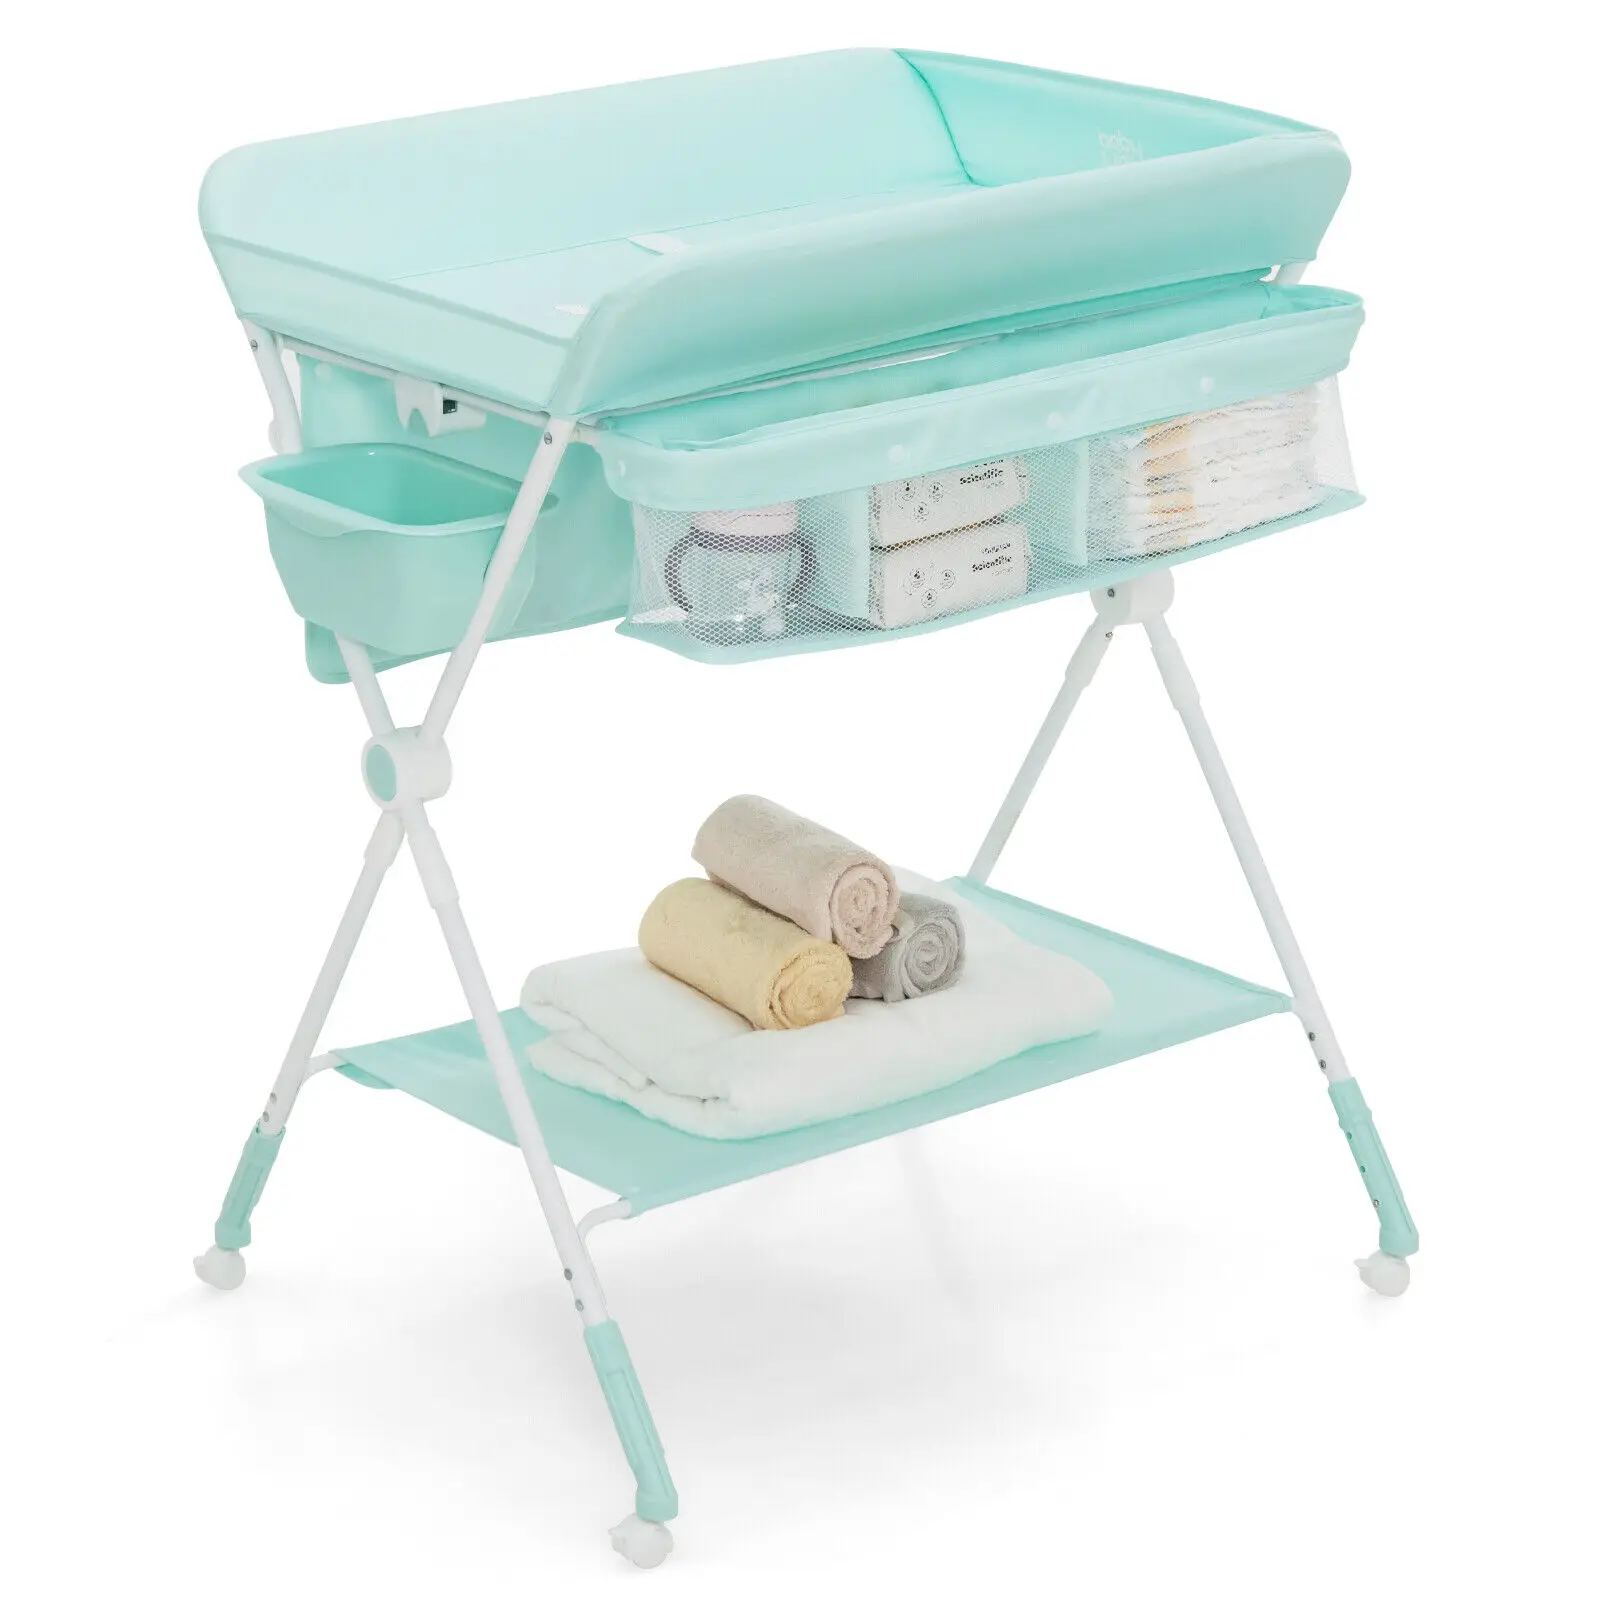 Babyjoy Foldable Baby Diaper Changing Table Mobile Nursery Organizer for Newborn Blue